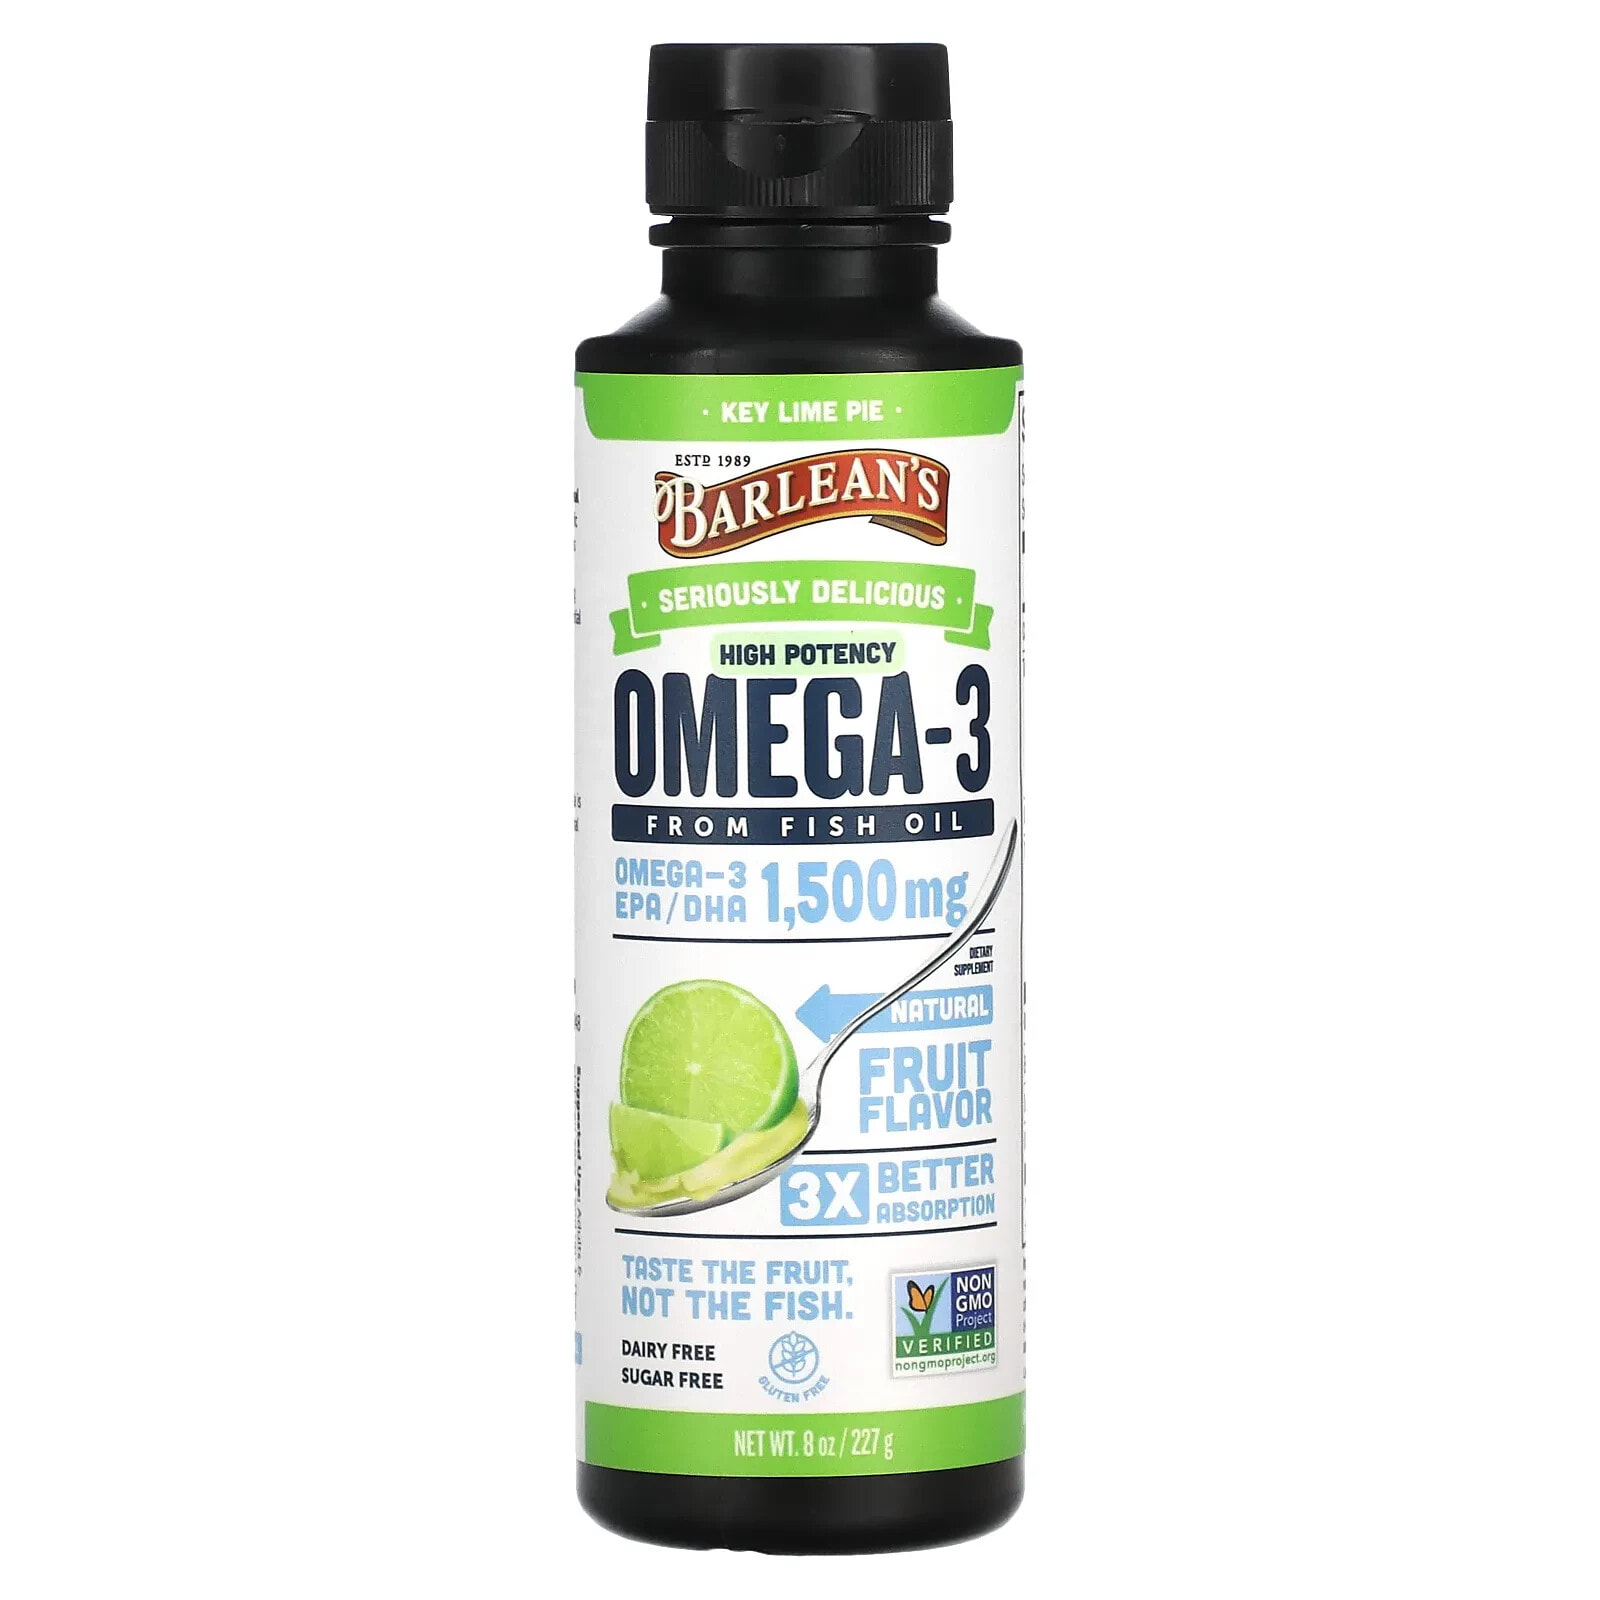 Seriously Delicious, Omega-3 from Fish Oil, Key Lime Pie, 1,500 mg, 8 oz (227 g)